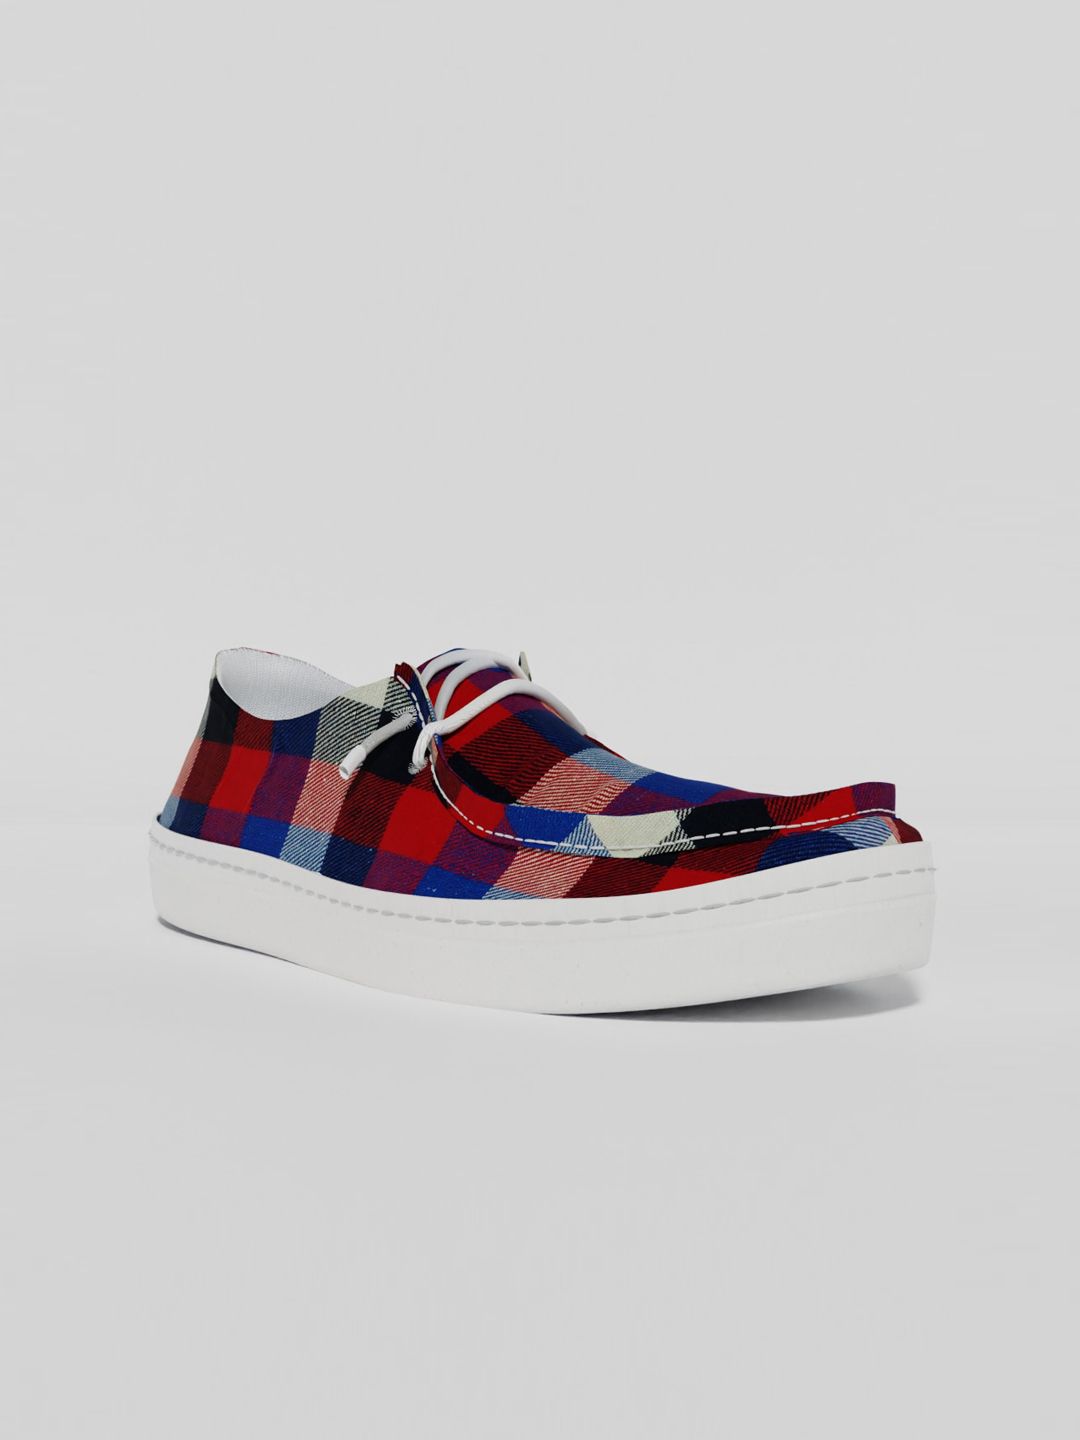 LOKAIT The Sneakers Company Women Colourblocked Slip-On Sneakers Price in India